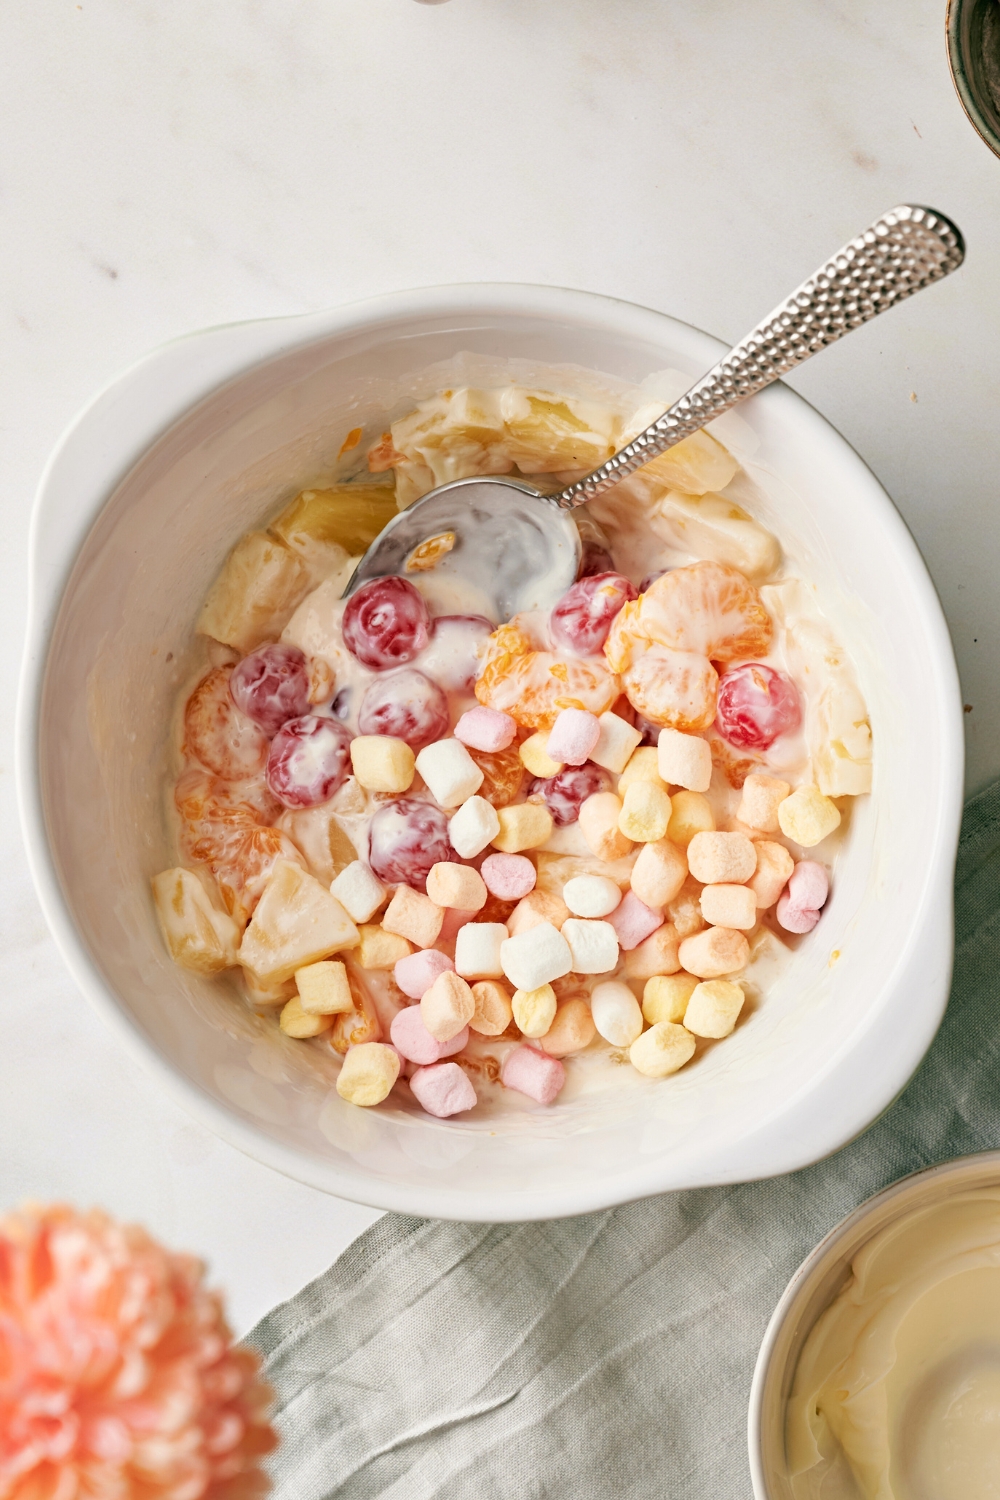 A spoon in a bowl with mini marshmallows on top of a fruit salad mixture.